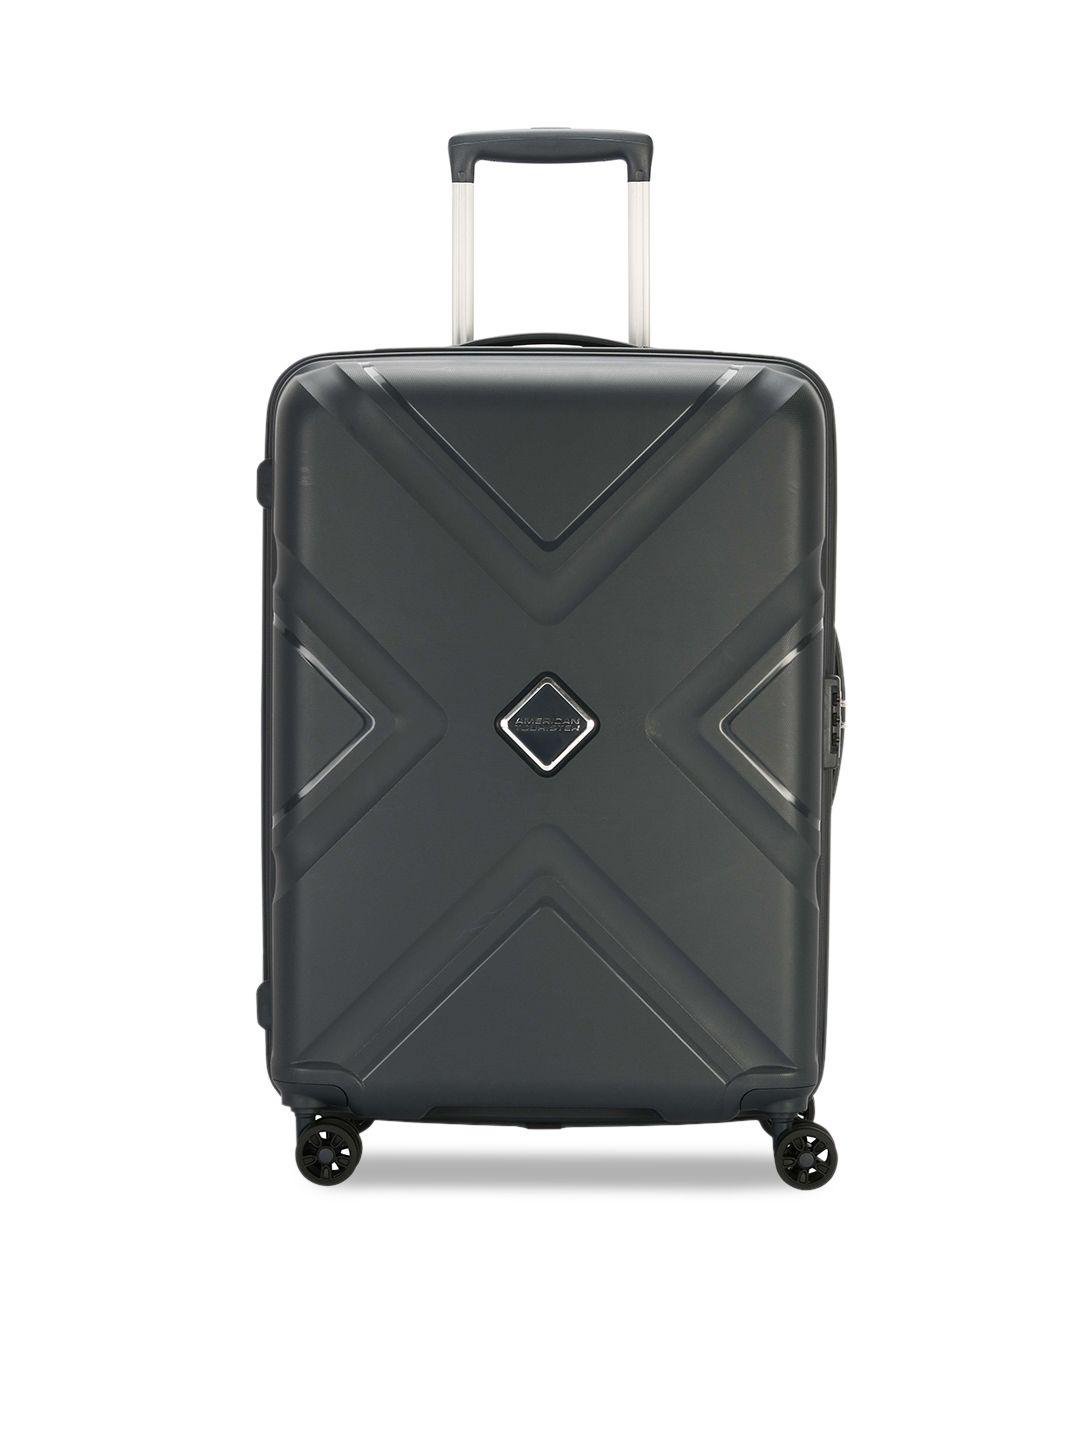 american-tourister--black-solid-small-trolley-suitcase